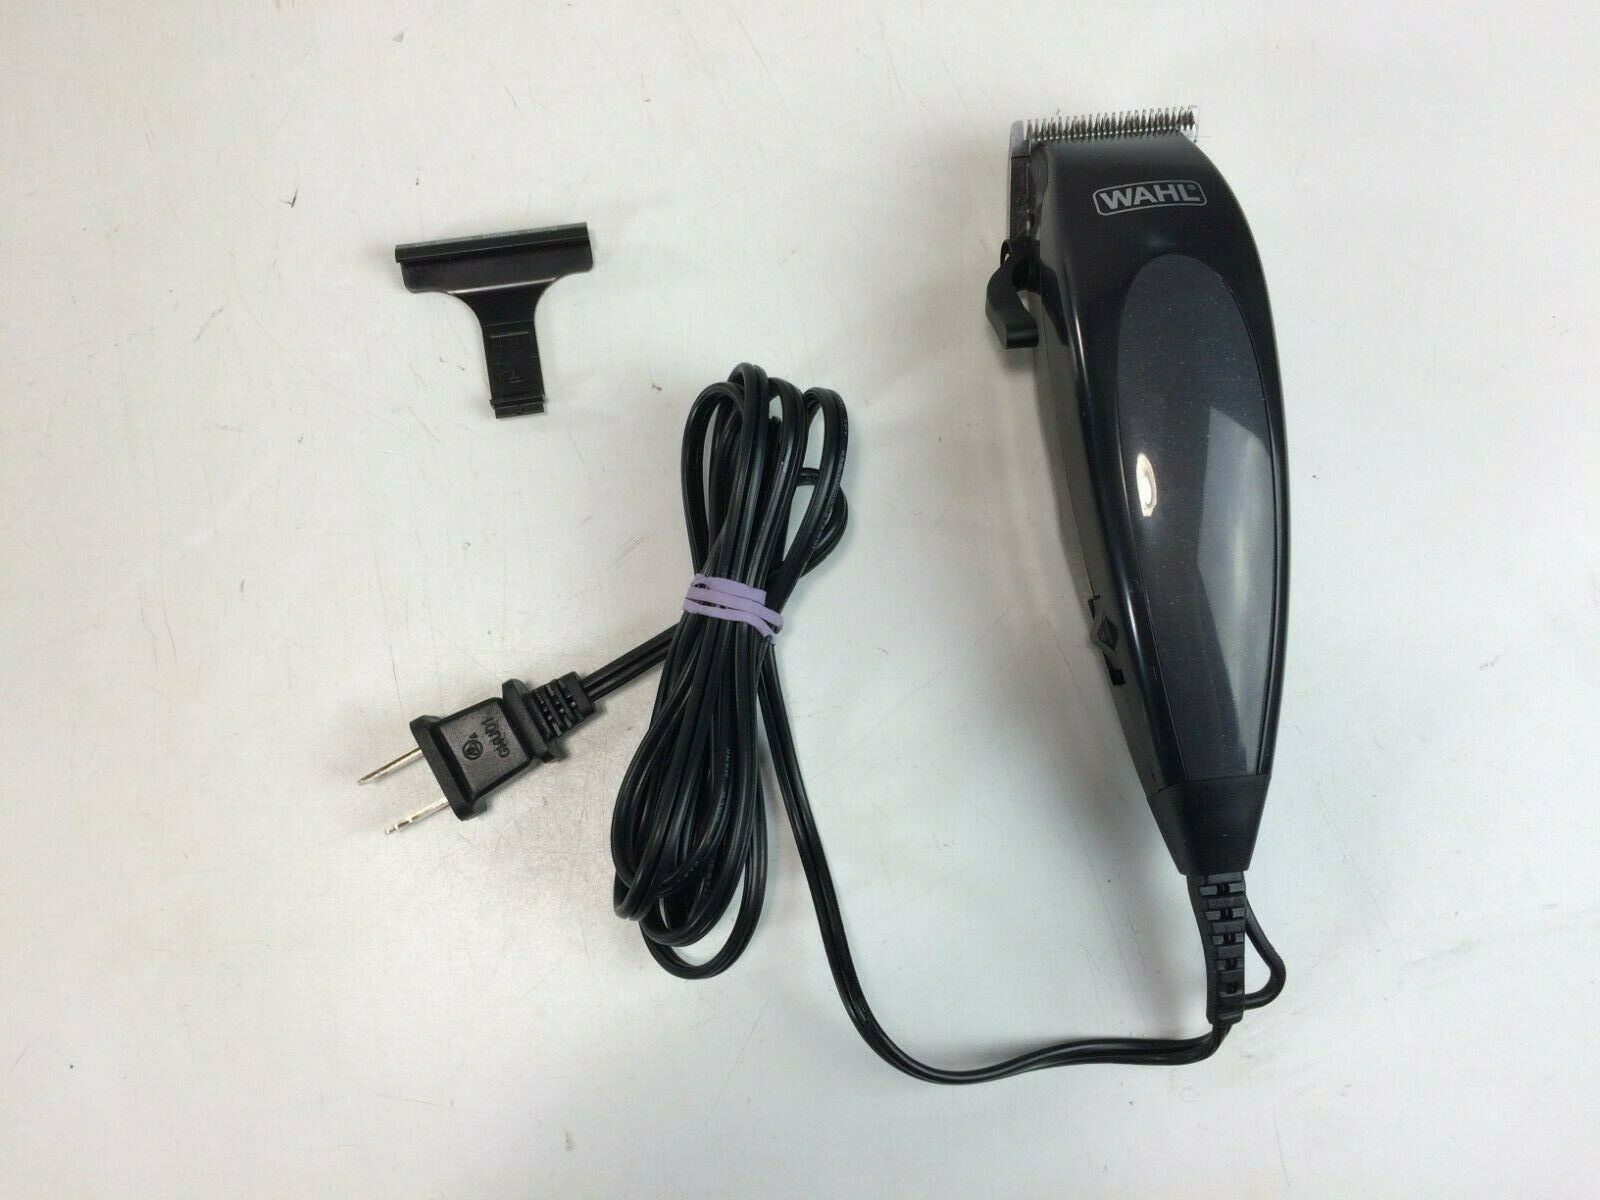 wahl model mc3 clippers